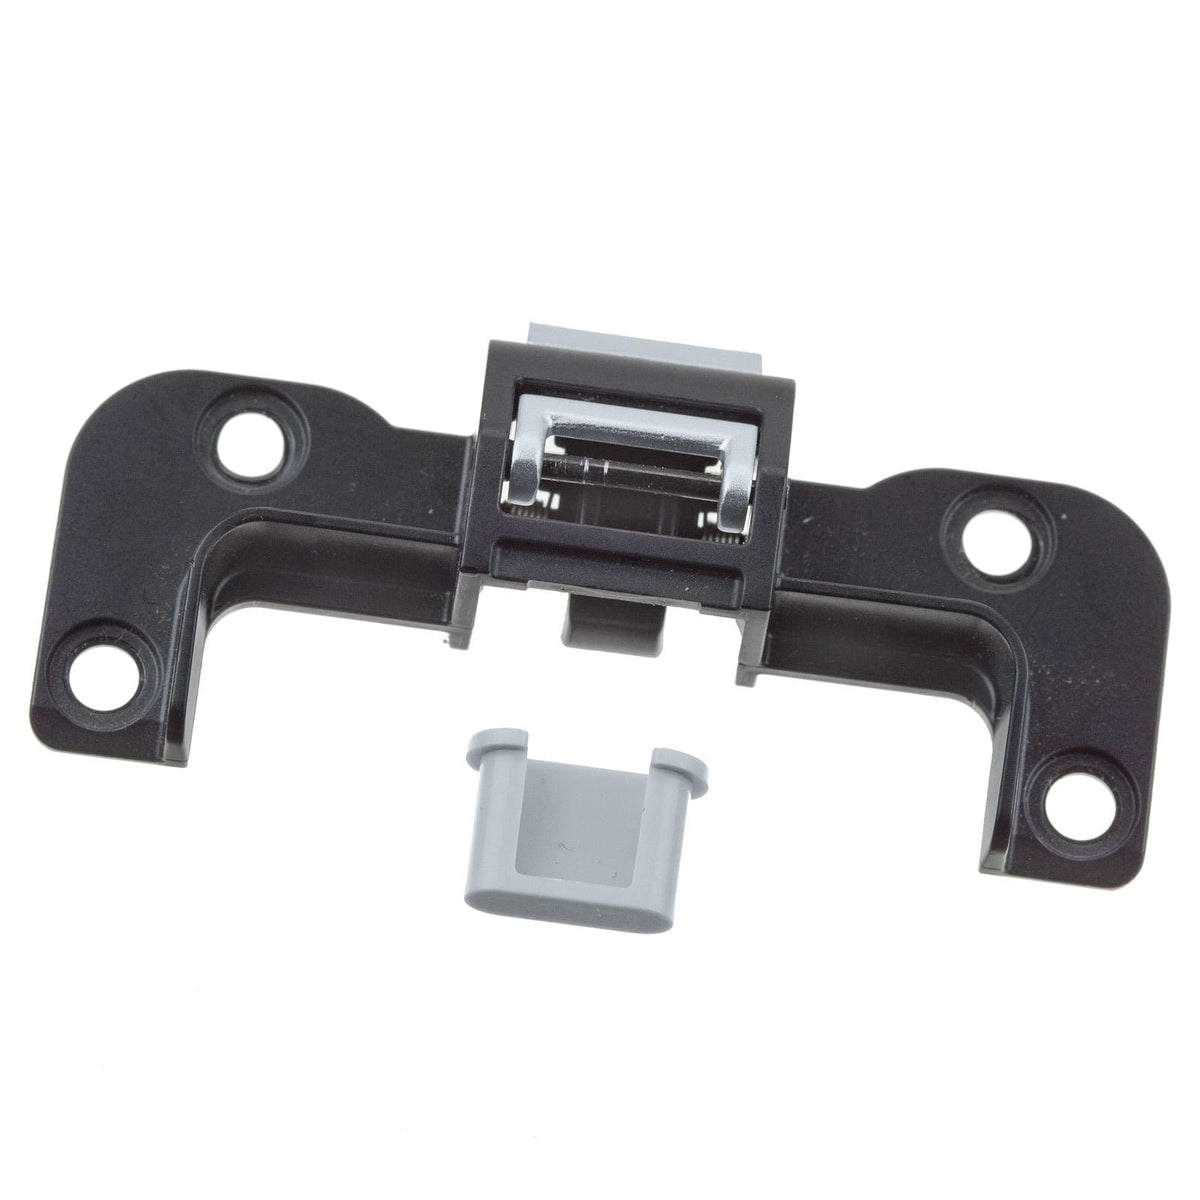 MEMORY DOOR LATCH (MDL) FOR IMAC 27" A1419 (LATE 2013, MID 2015)